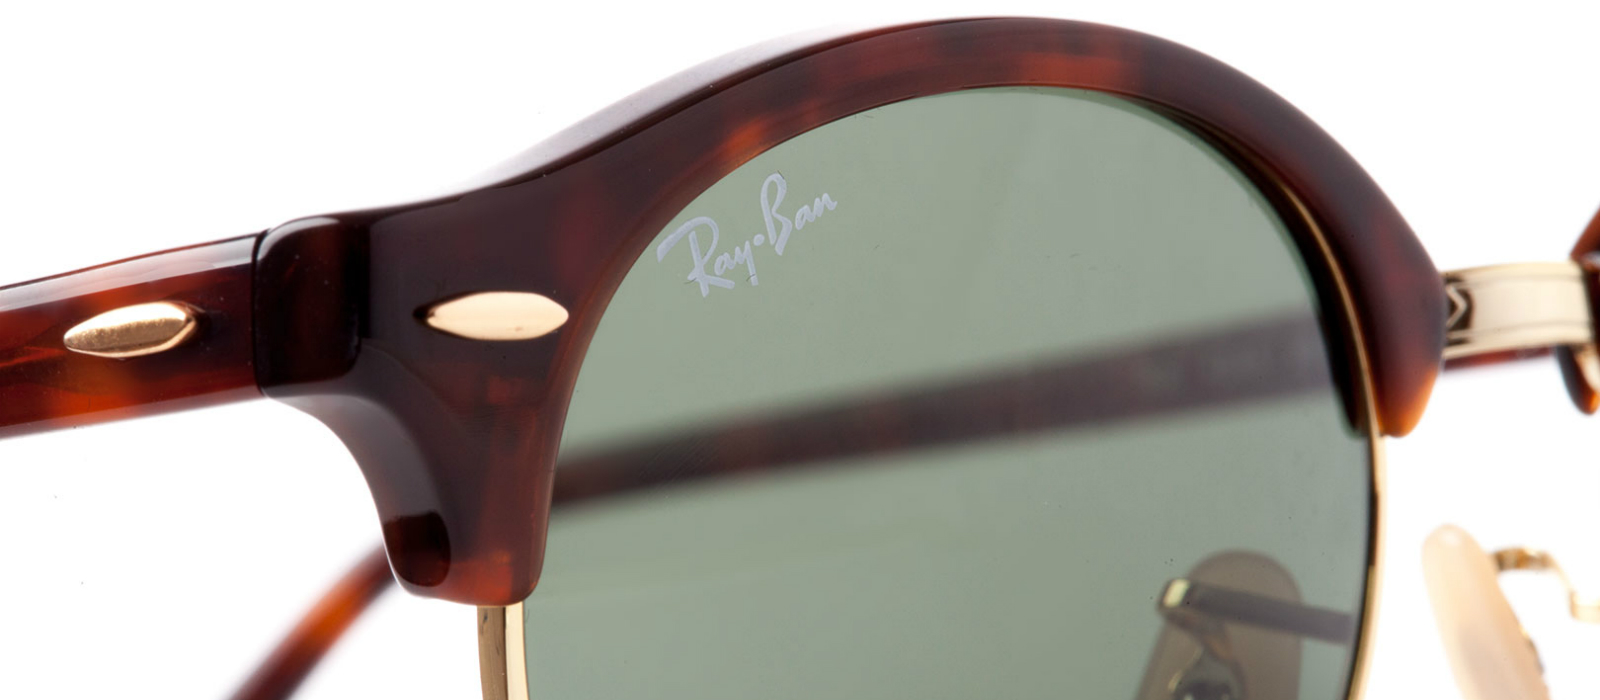 How To Spot Fake Ray Ban Sunglasses A Detailed 5 Step Guide Blog Lentiamo Co Uk